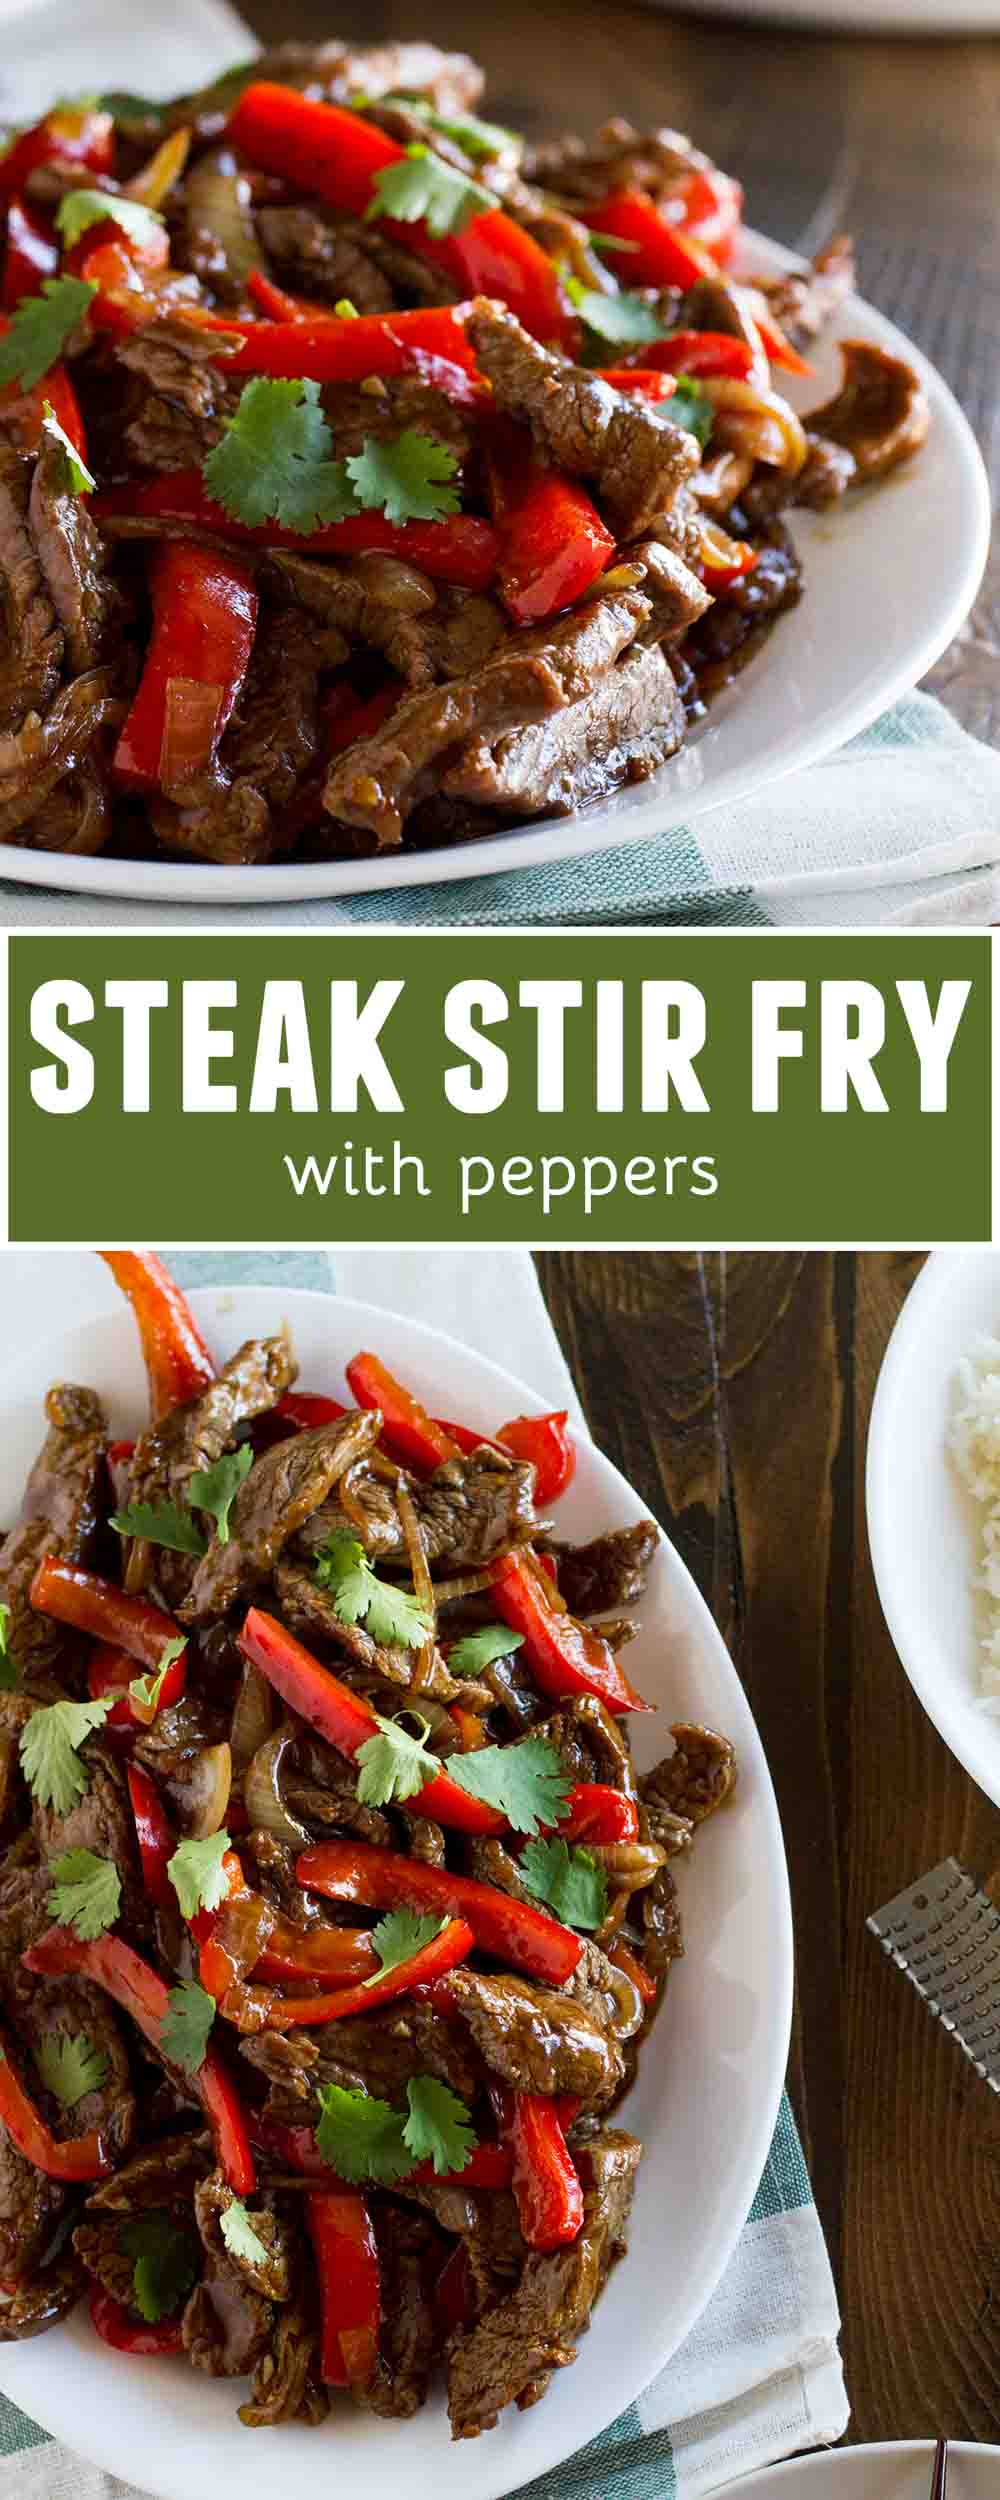 Steak Stir Fry Recipe with Peppers - Taste and Tell